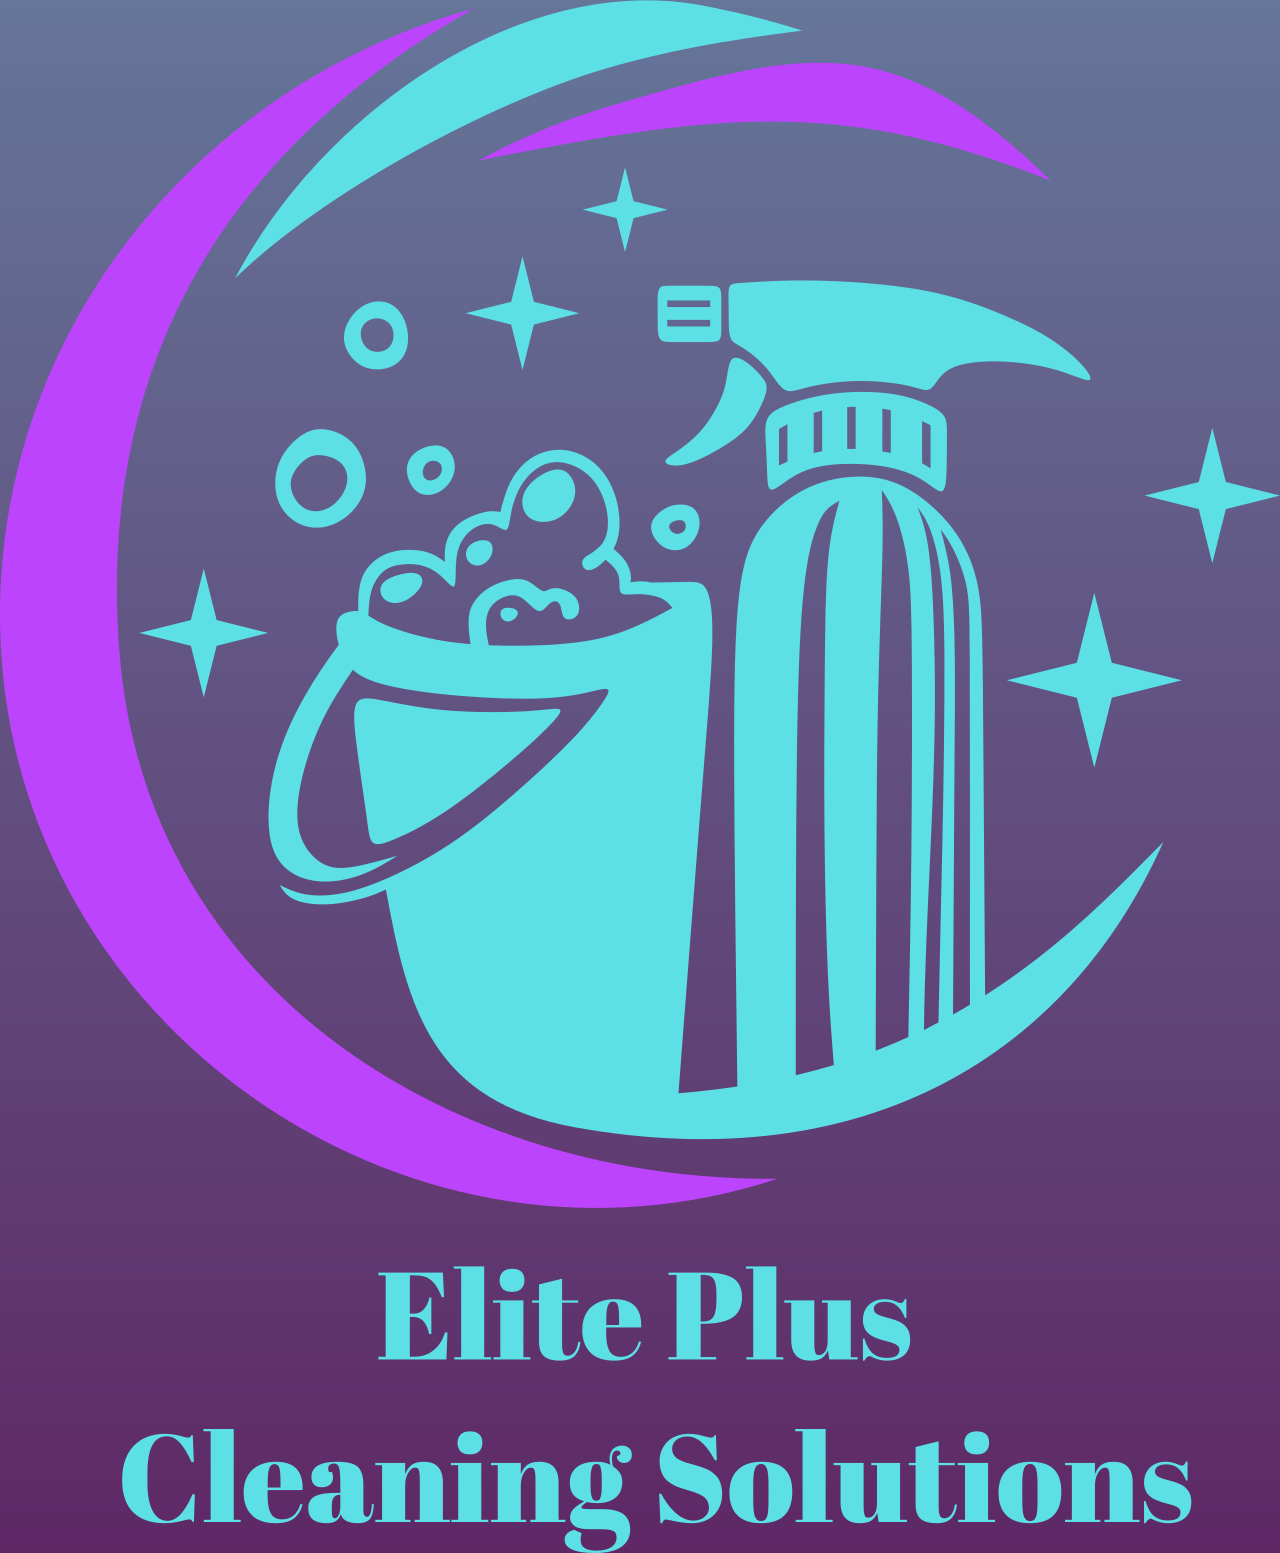 Elite Plus Cleaning Solutions's web page